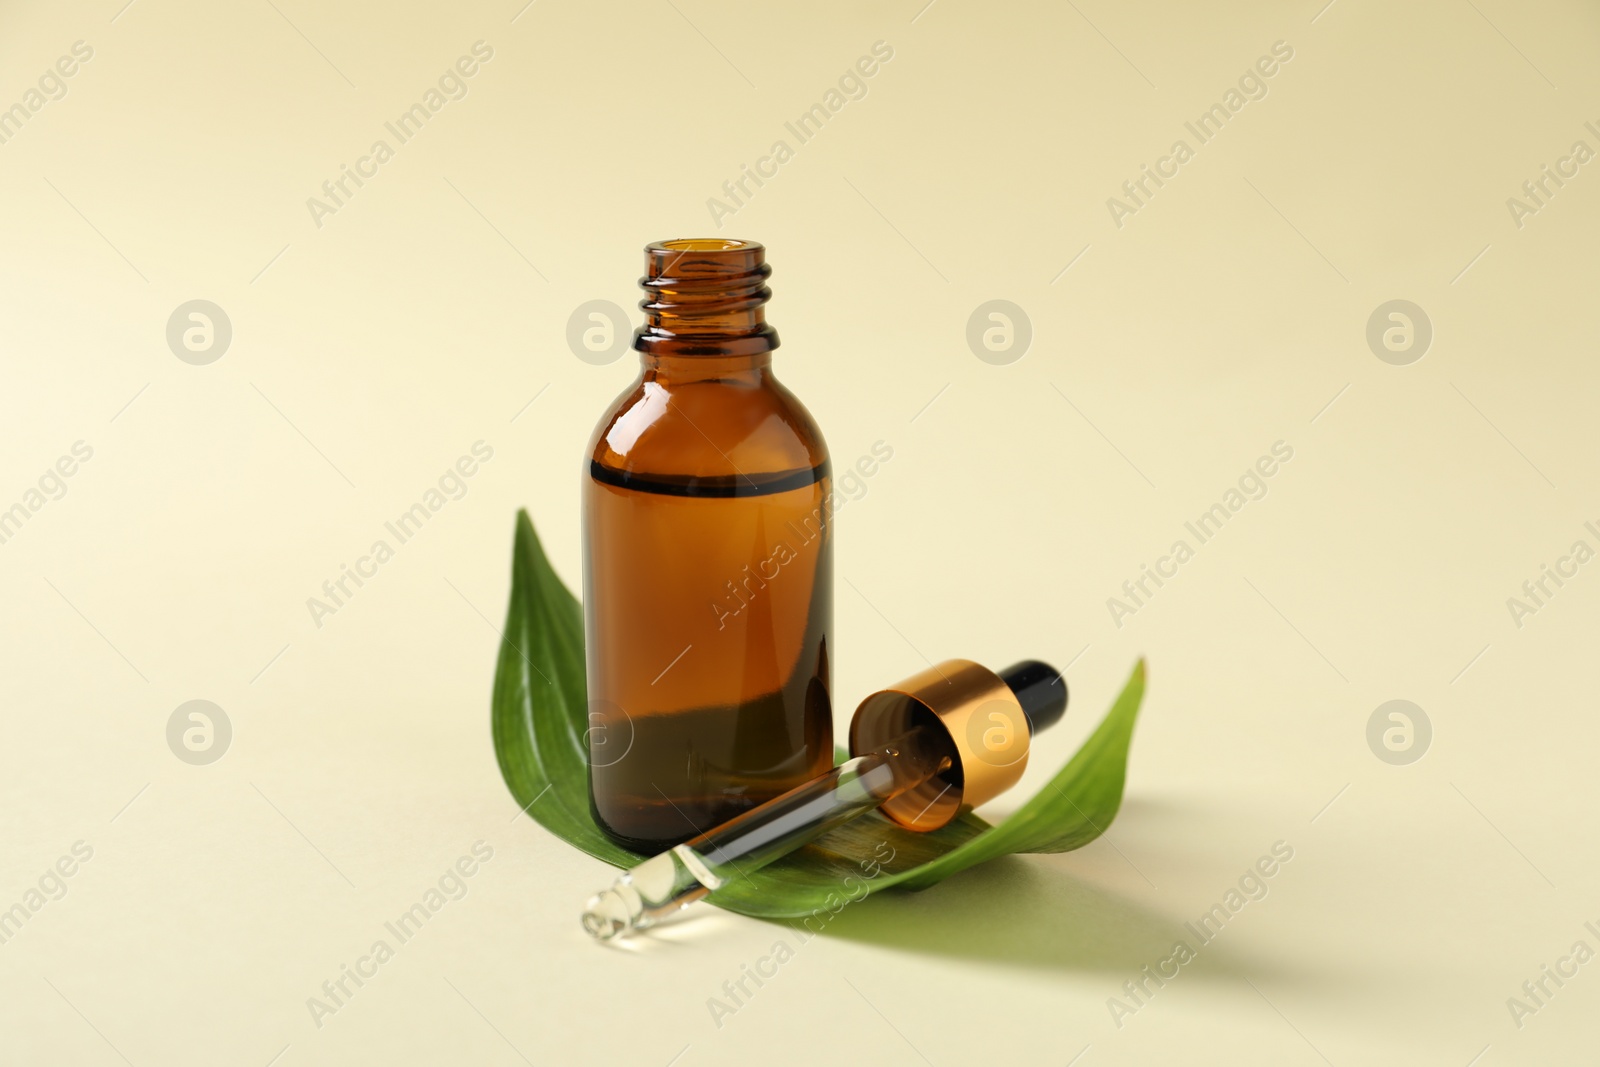 Photo of Bottle of cosmetic oil, pipette and leaf on beige background